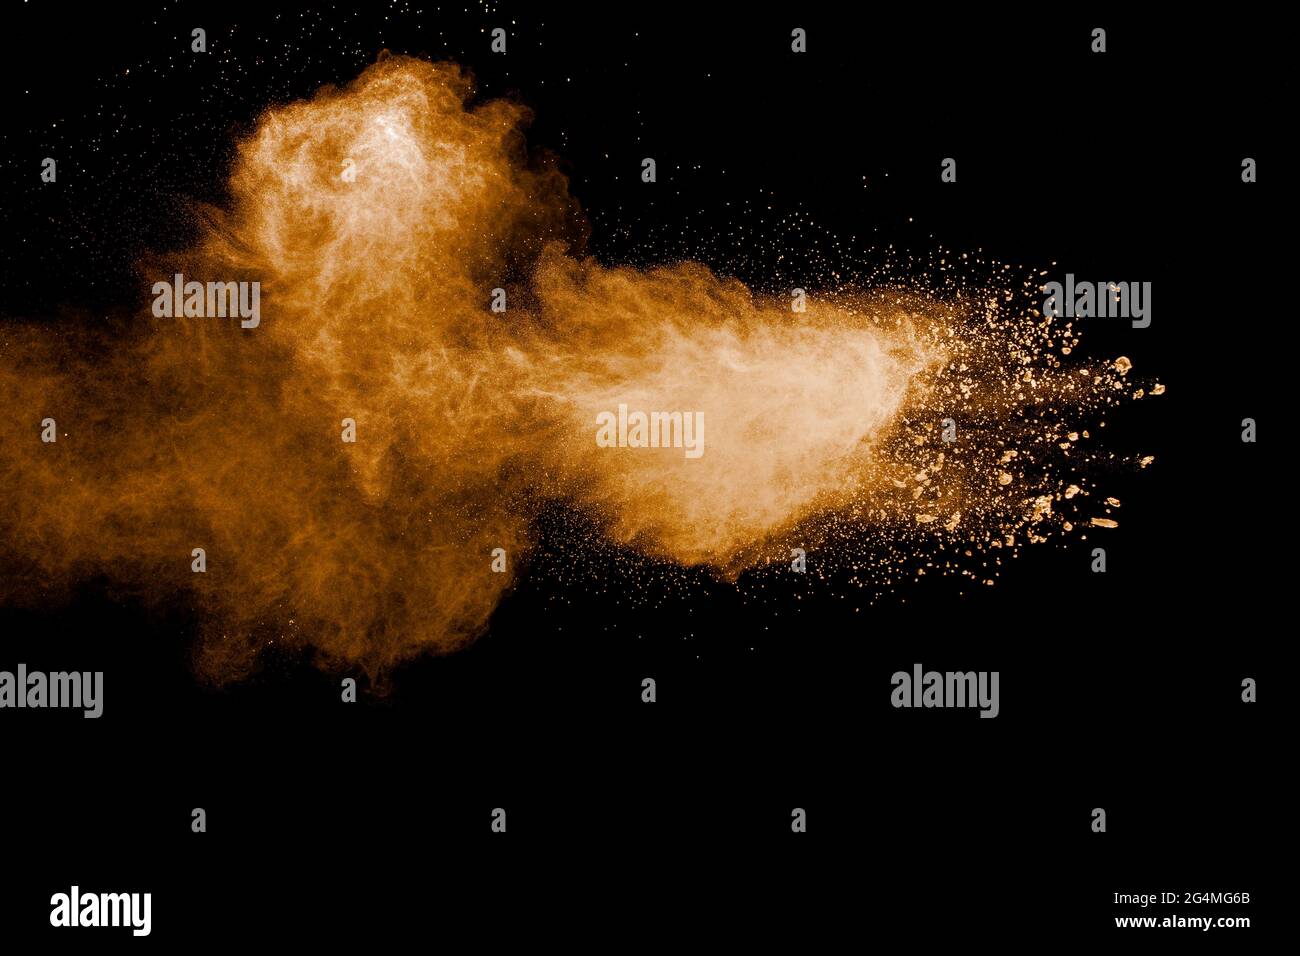 Freeze motion of brown dust explosion.Stopping the movement of brown powder.Explosive brown powder on black background. Stock Photo